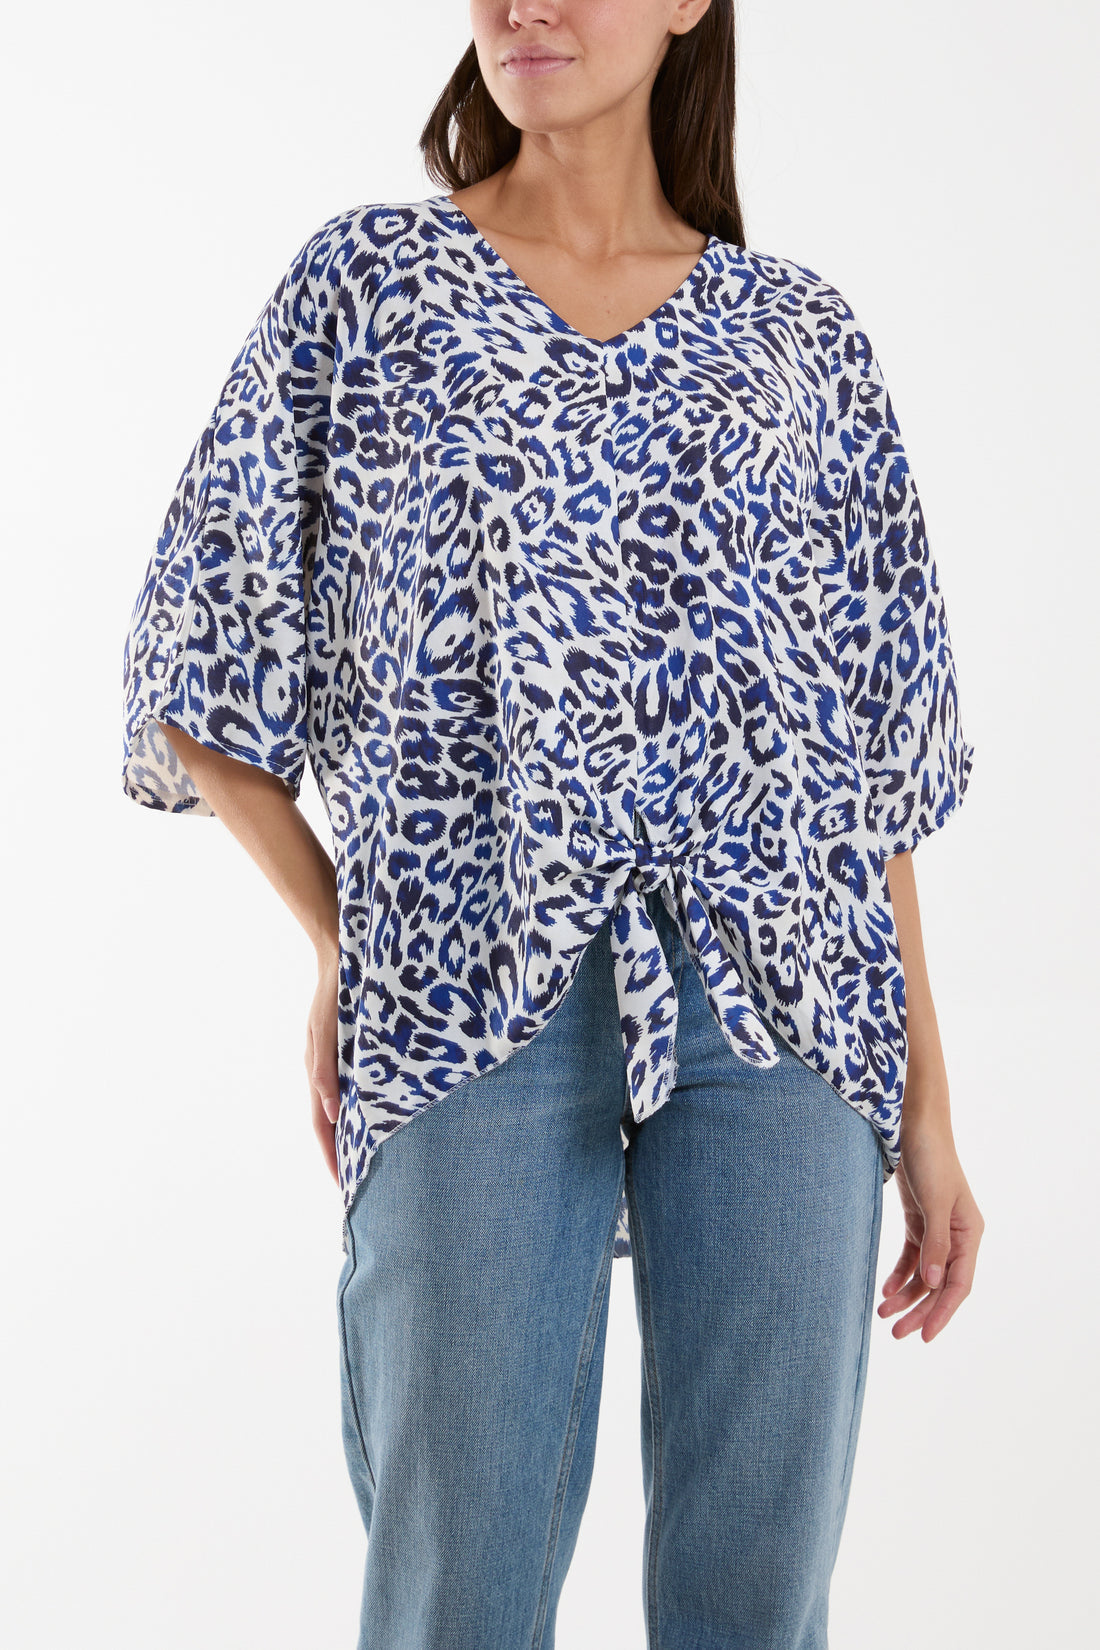 Knot Front Leopard Print Top - Navy